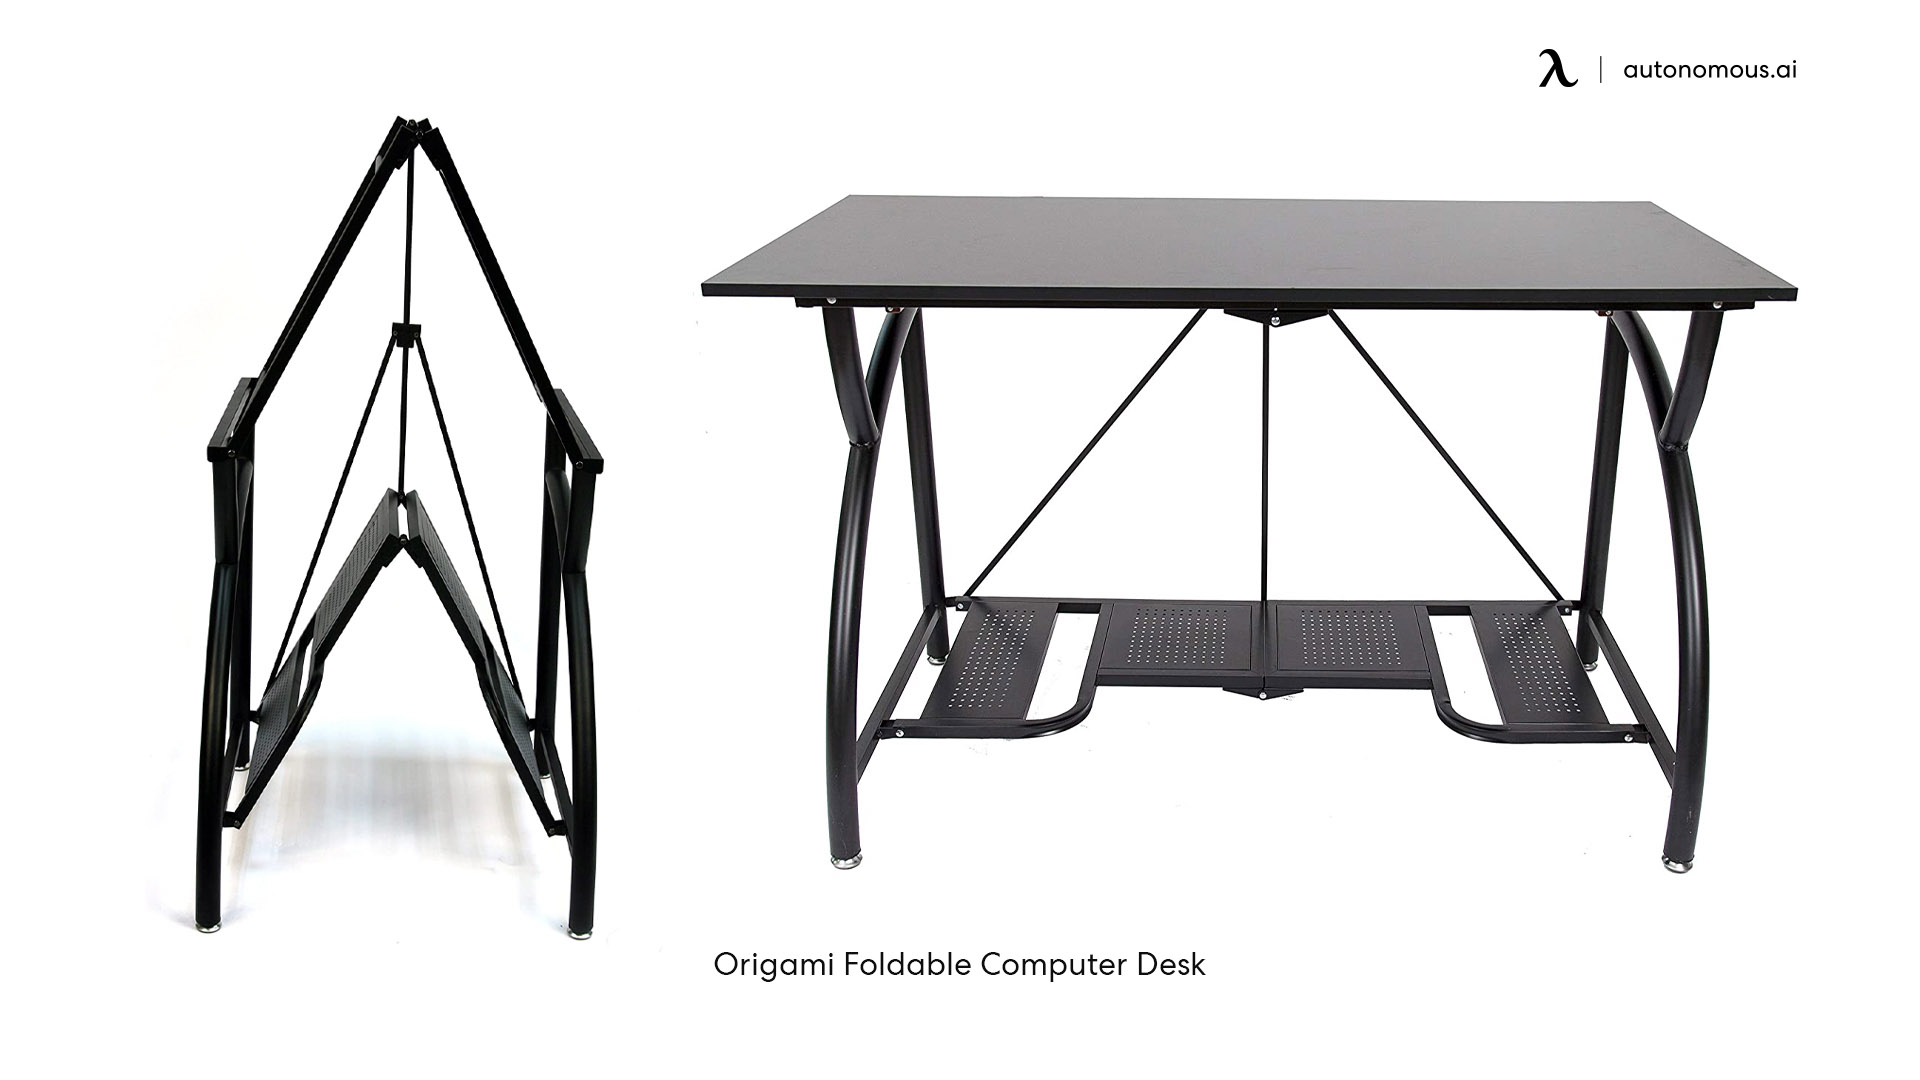 Foldable Computer Desk by Origami